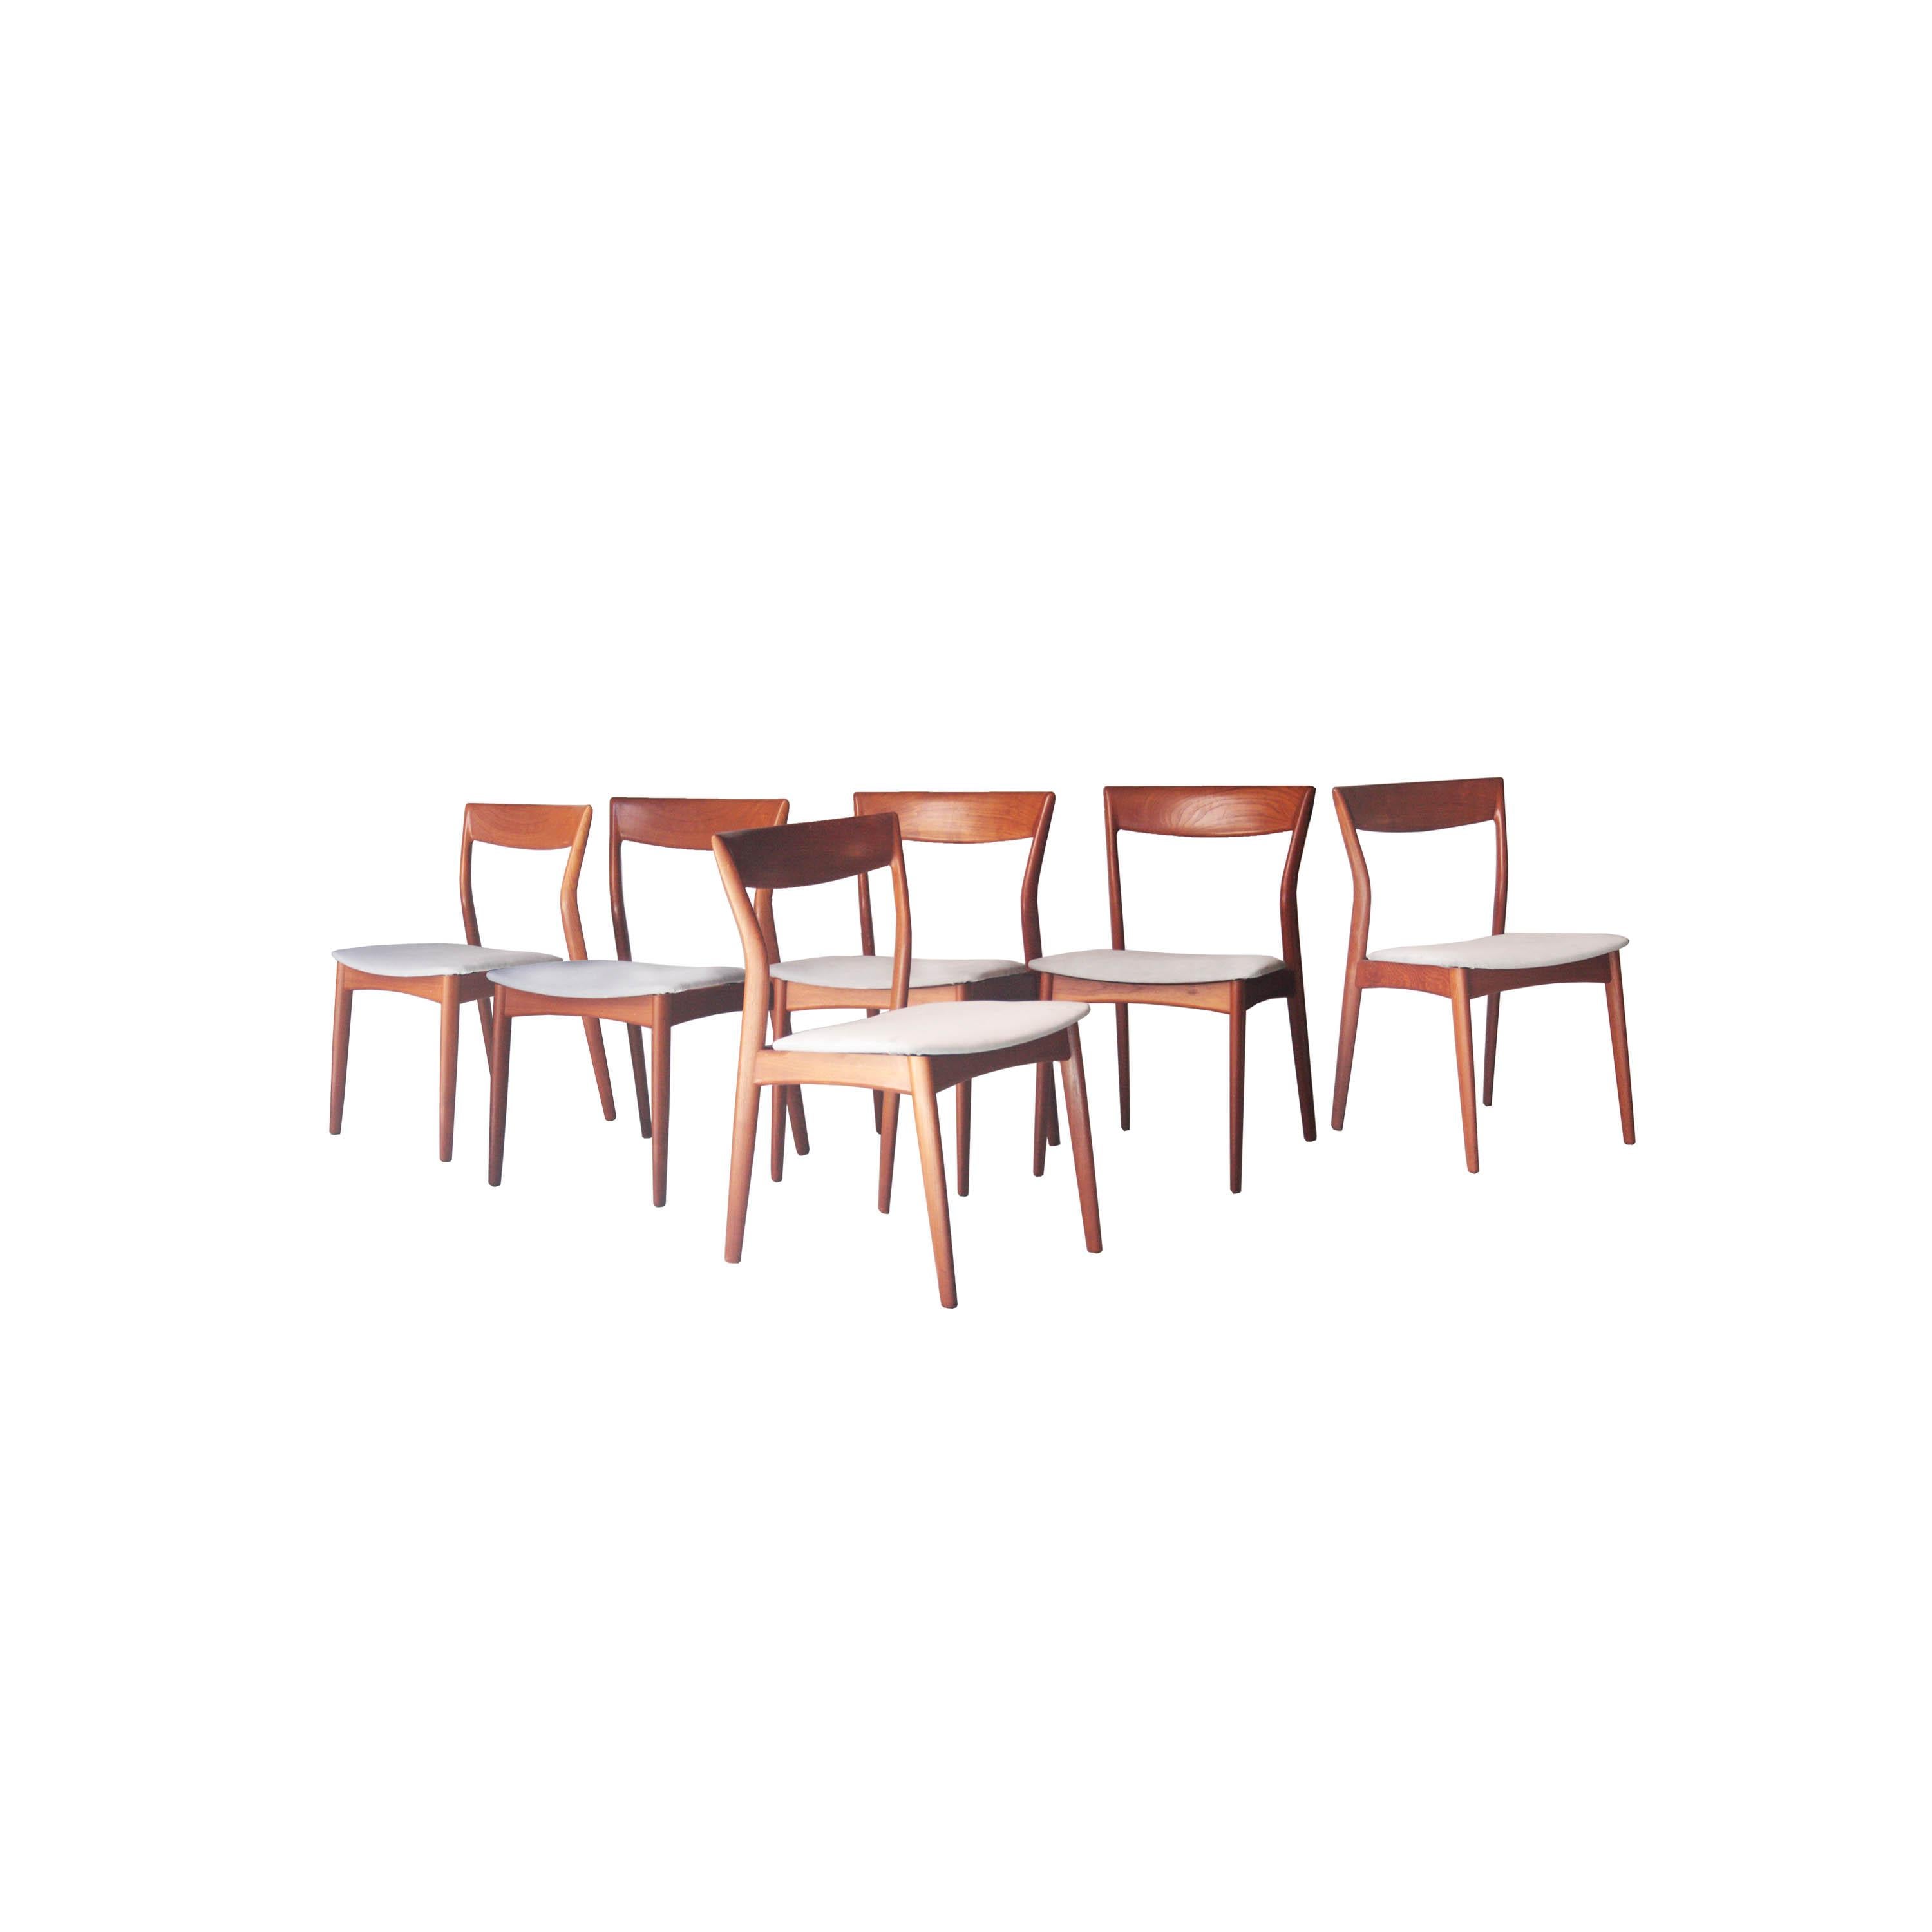 Moller Styled Midcentury Grey Teak Swedish Set of Six Chairs, Sweden, 1960 For Sale 2